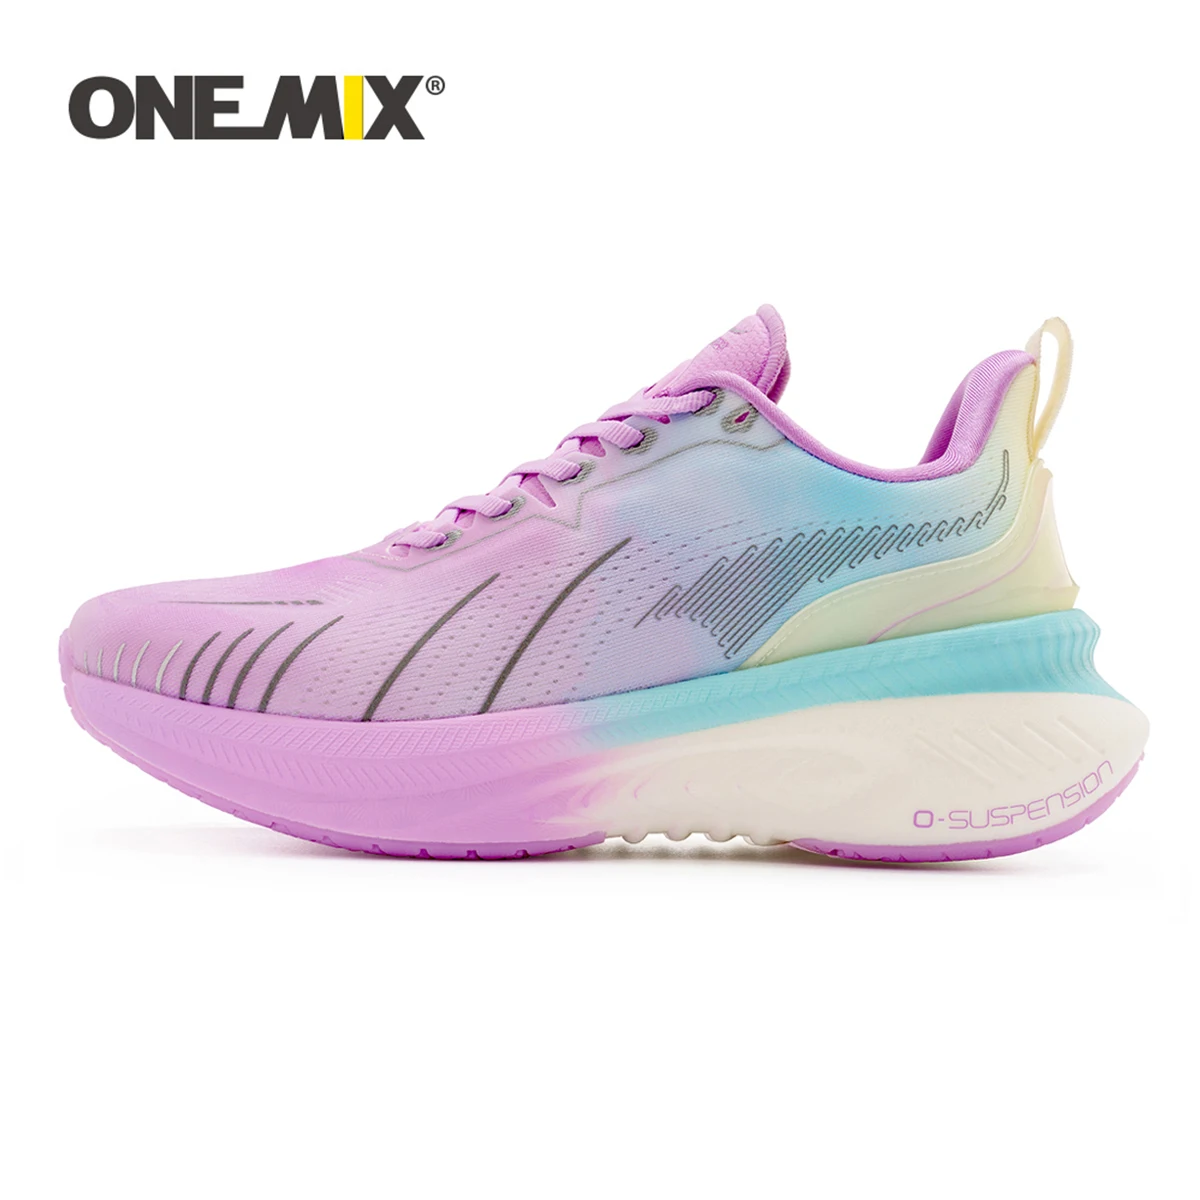 ONEMIX New Ultra-light Rebound Sport Shoes Mens Outdoor Trainers Sneakers Running Shoes Athletic Gym Fitness Walking Jogging